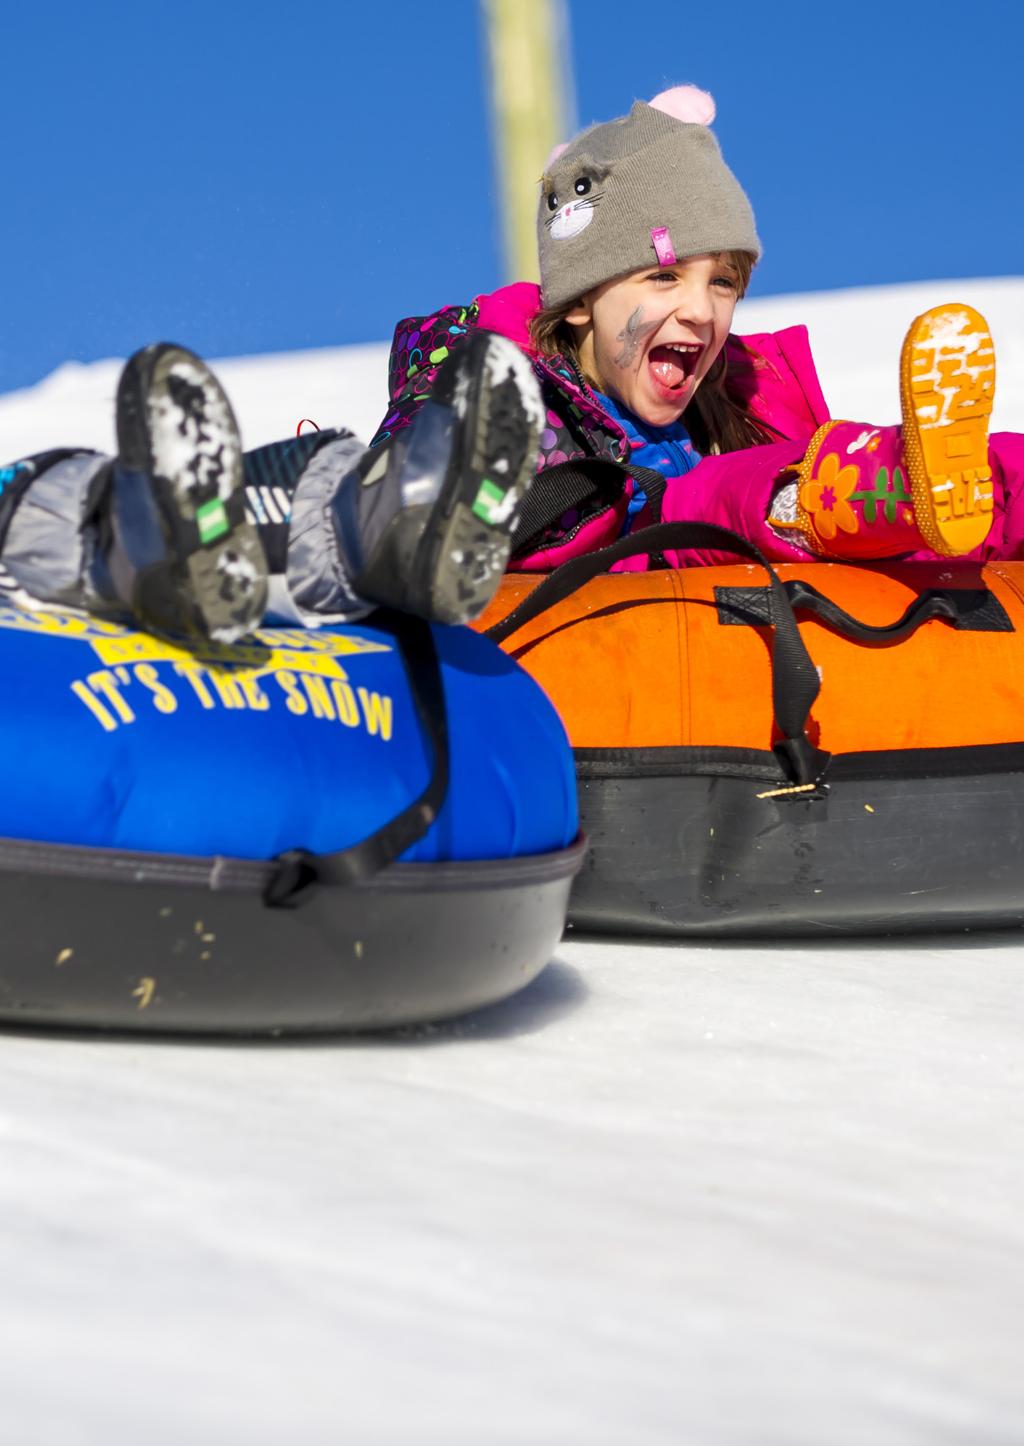 Let us book a magical Birthday party for your child! Here at Big White Ski Resort we love to see children enjoying themselves in our spectacular winter wonderland.